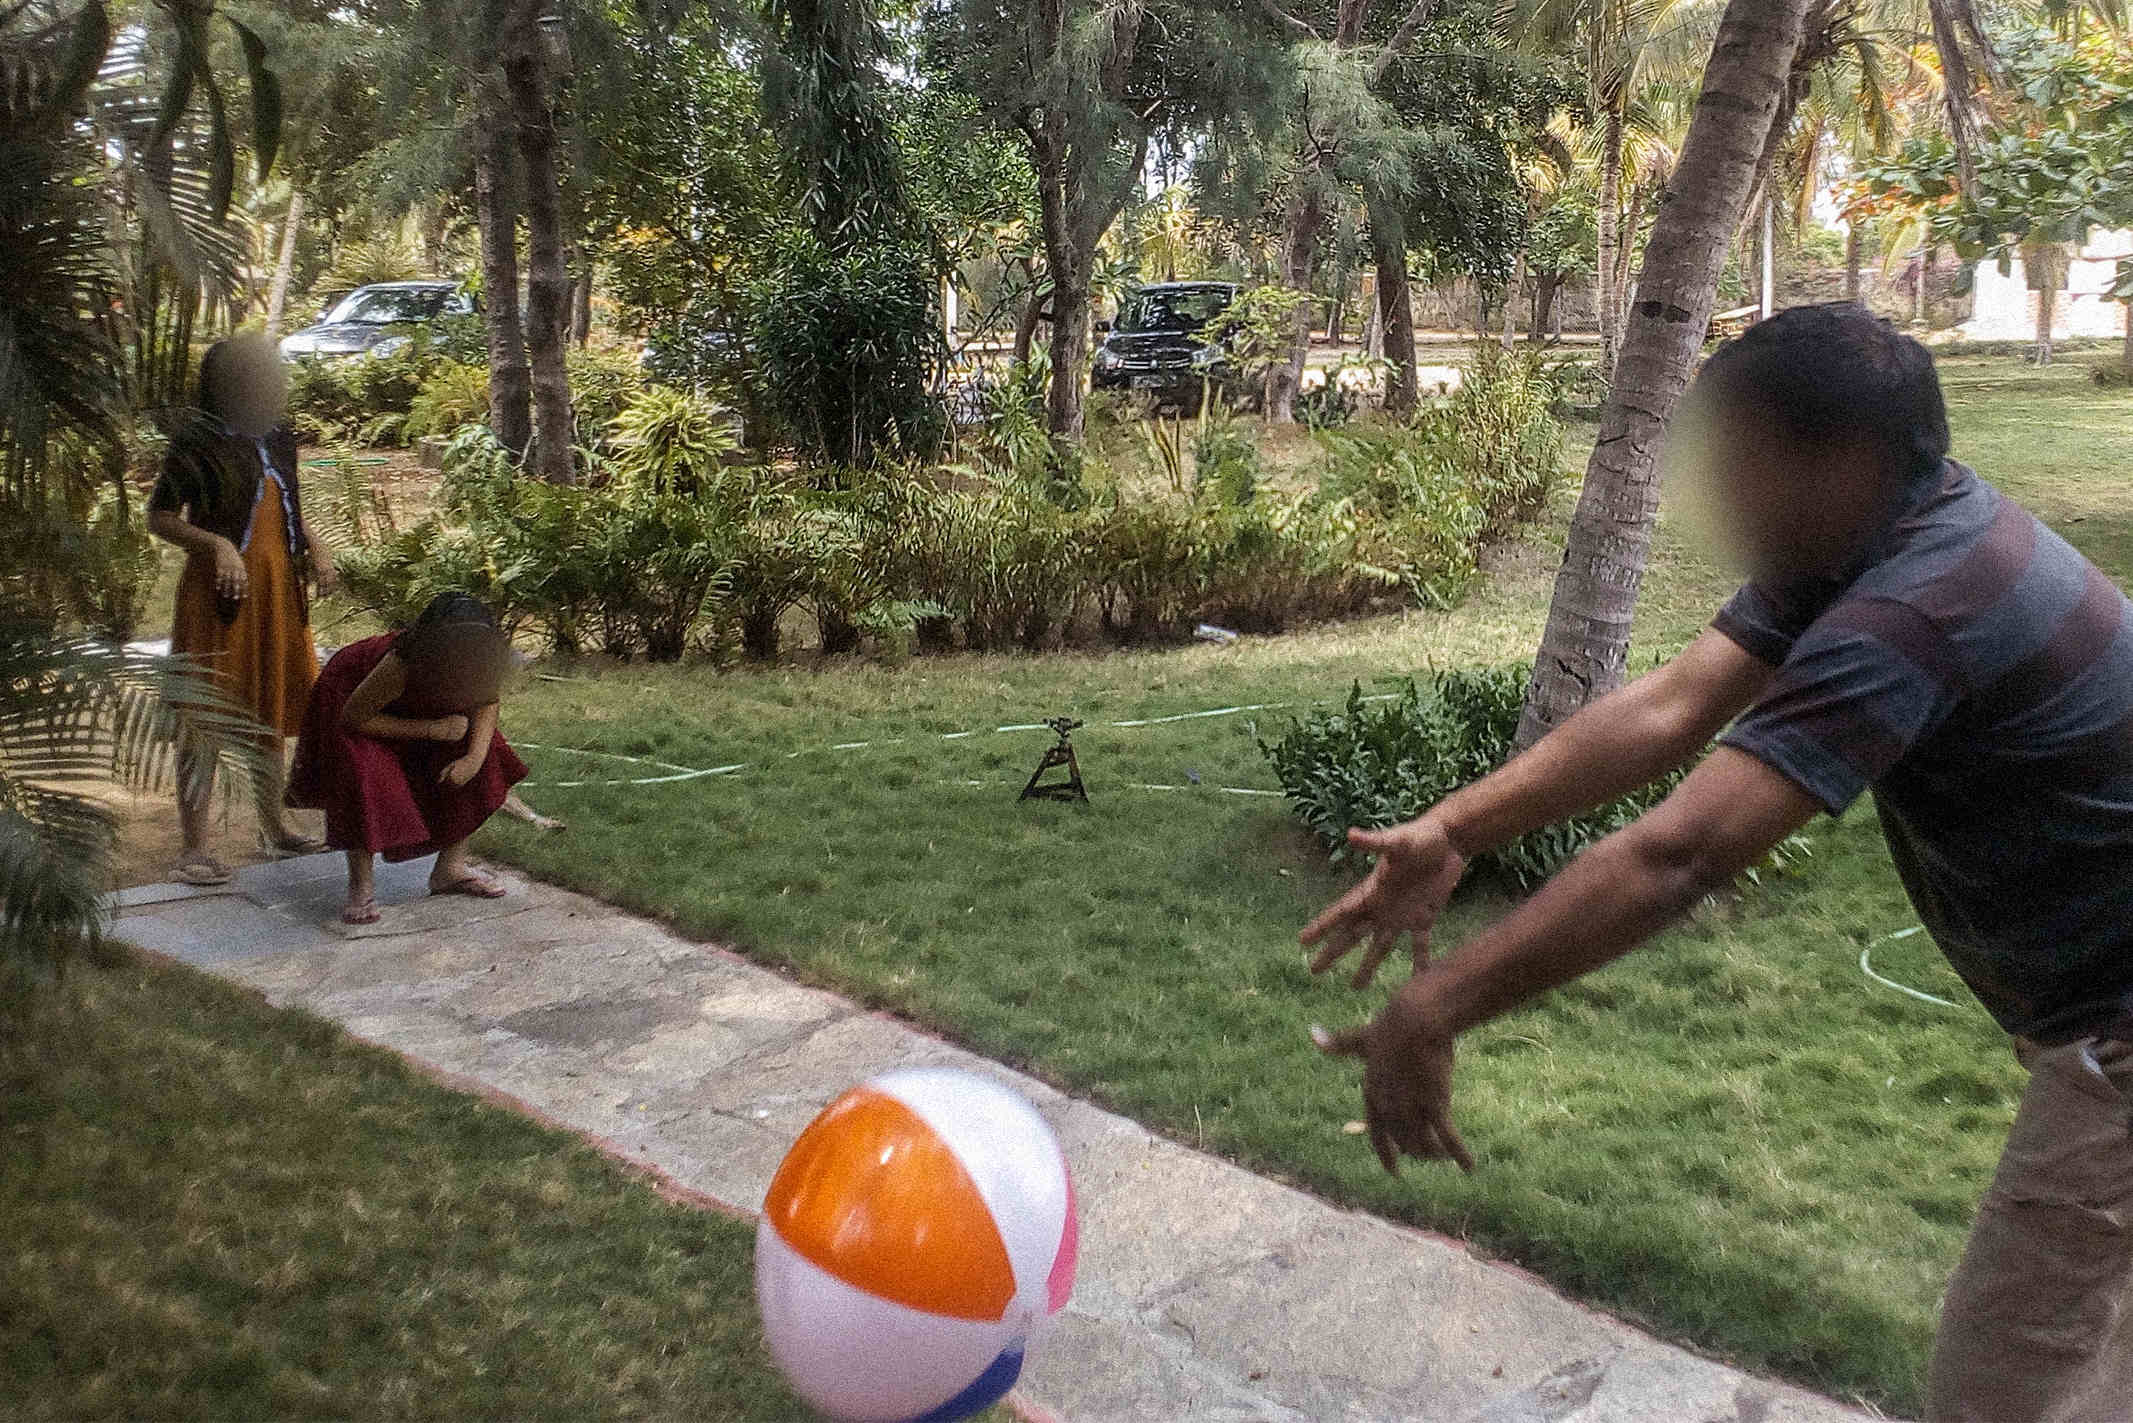 South Asian Christians playing outside in a grassy area with an inflatable beach ball